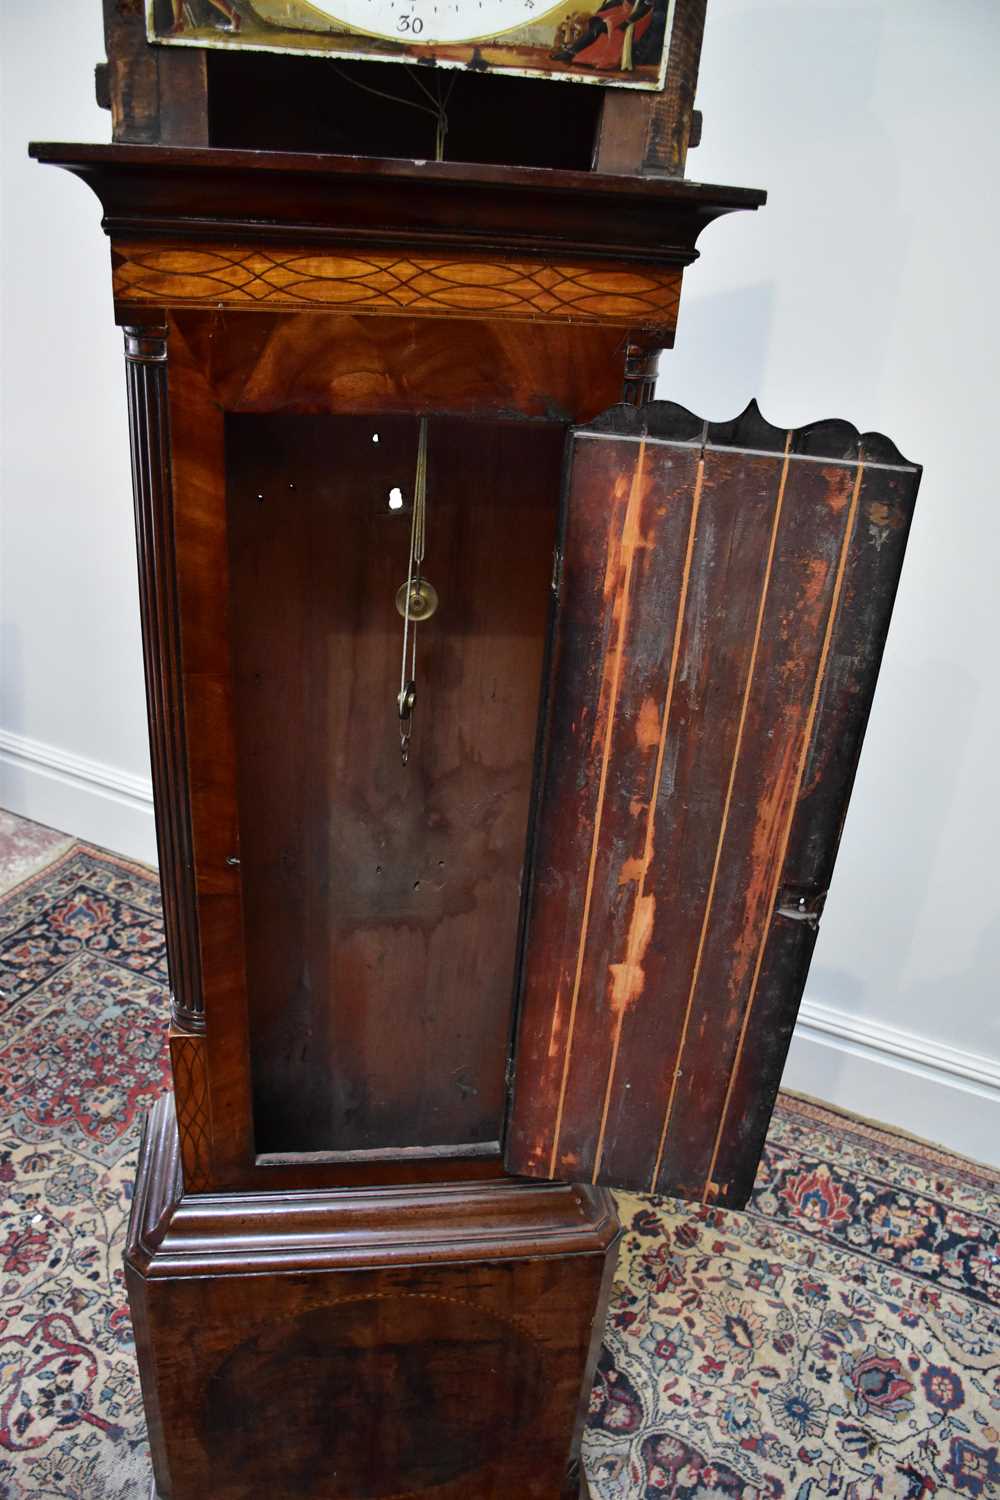 JOHN BARBER, NOTTINGHAM; a late 18th/early 19th century eight day longcase clock, the painted face - Bild 4 aus 4